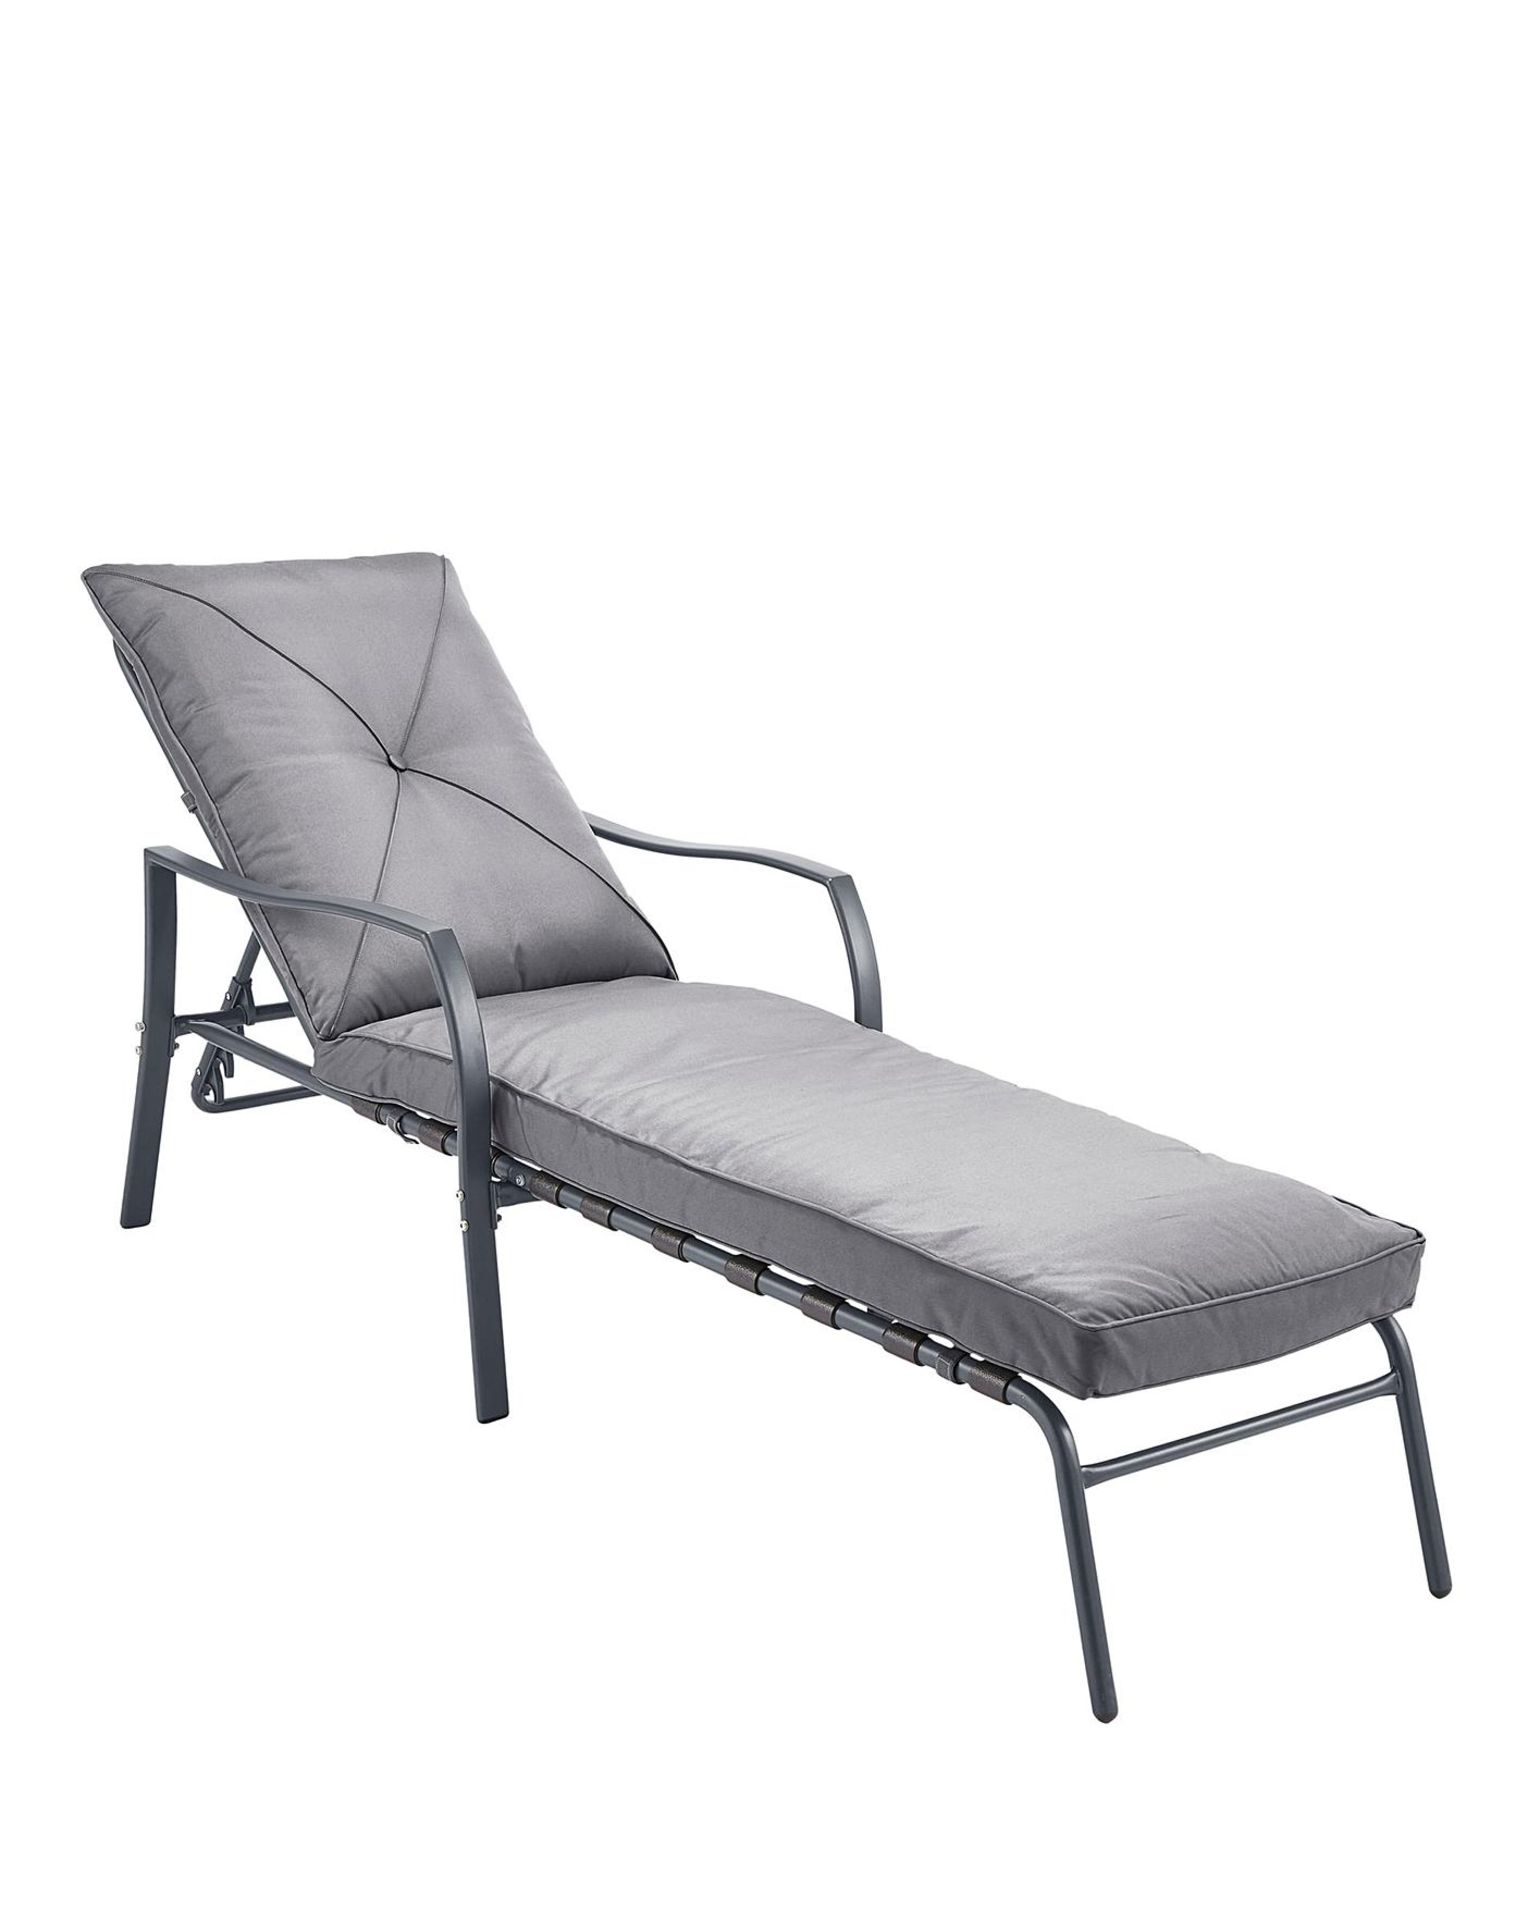 Brand New Luxury Siena Lounger. RRP £199 R18.1Siena lounger is durable and weather resistant.store - Image 2 of 4